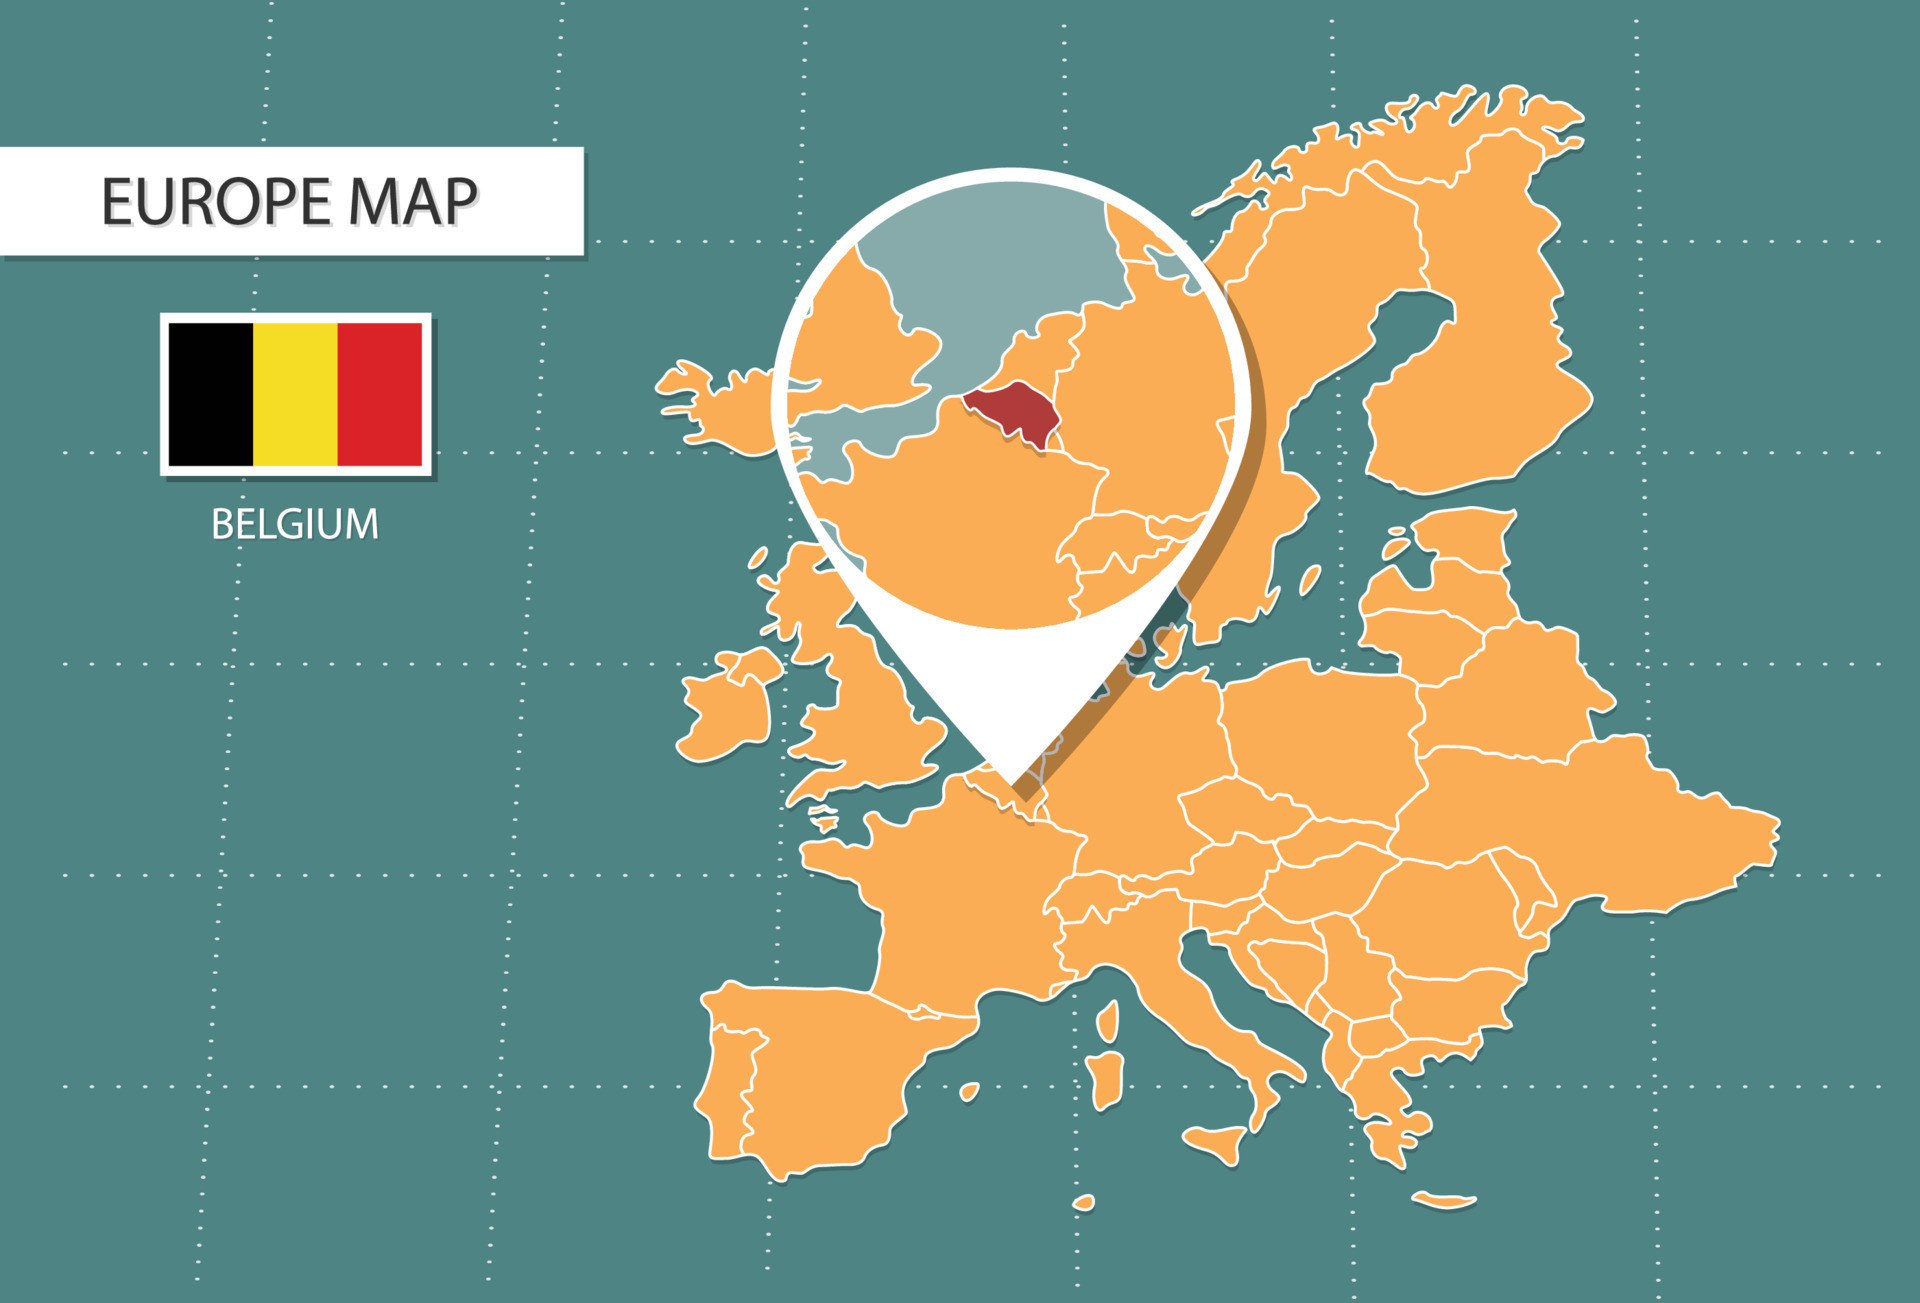 Belgium Map In Europe Zoom Version Icons Showing Belgium Location And Flags Vector 